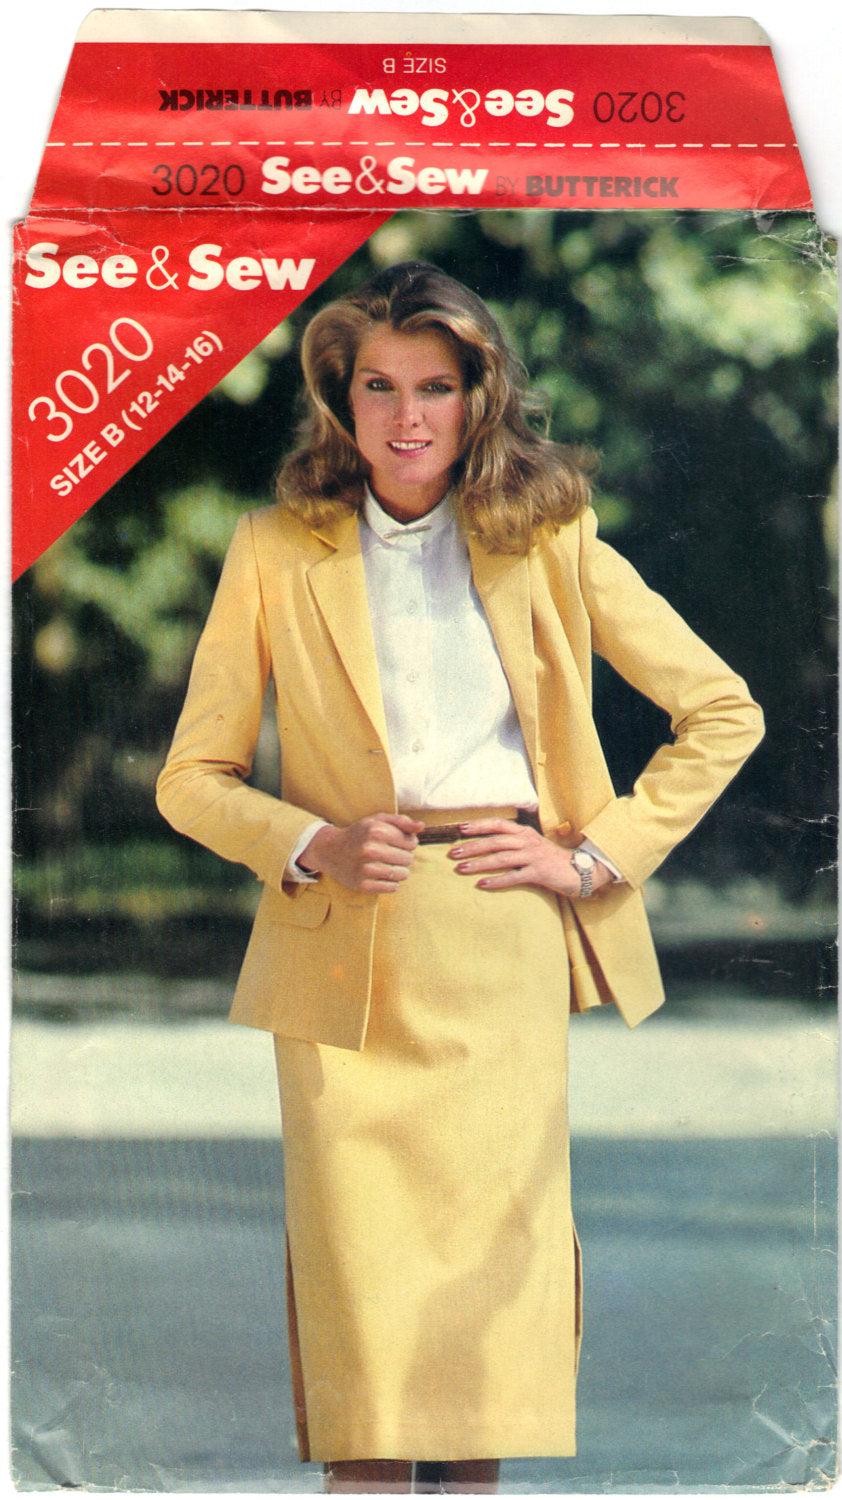 Butterick See and Sew 3020 Pattern Vintage Misses Jacket And Skirt